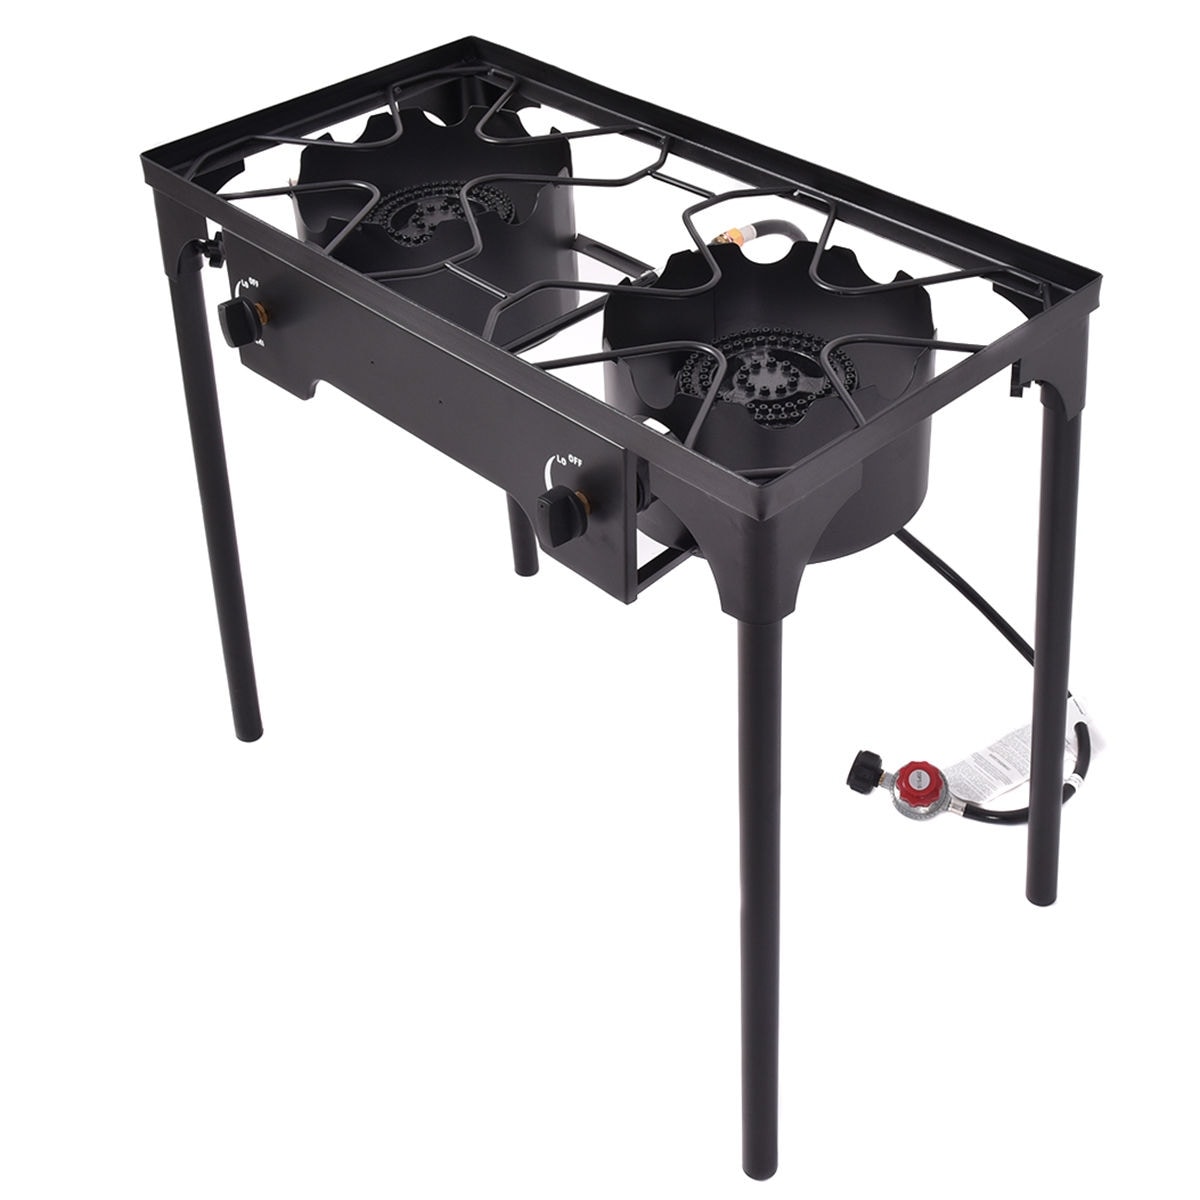 https://ak1.ostkcdn.com/images/products/is/images/direct/bf8babf00de1974a04ac59982d27f4fe330def38/Costway-Double-Burner-Gas-Propane-Cooker-Outdoor-Camping-Picnic-Stove.jpg